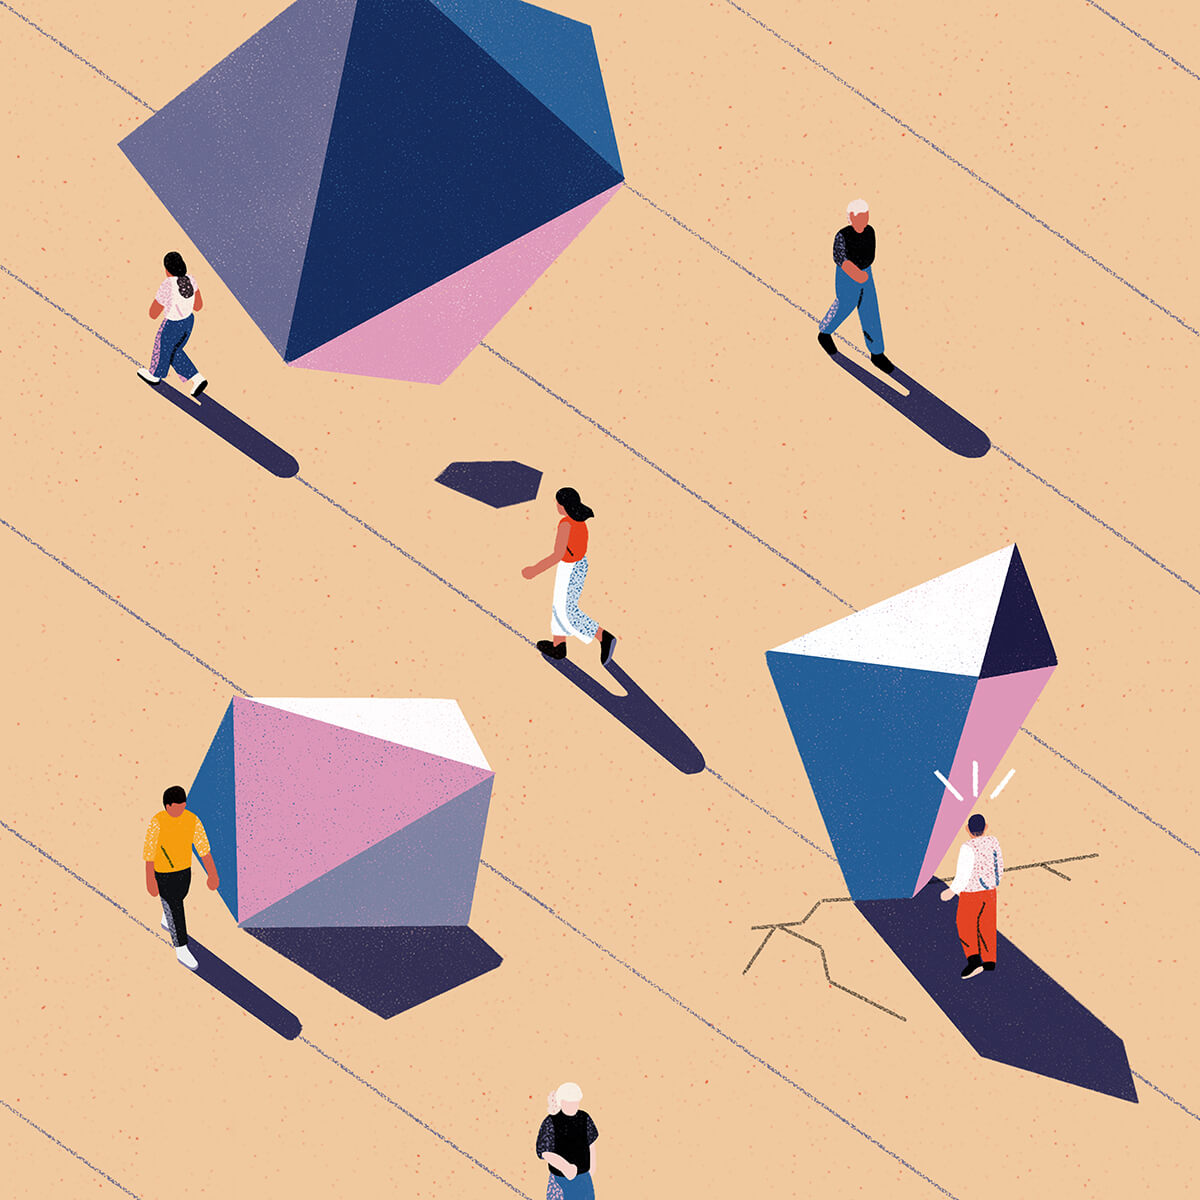 A vector illustration of a group of people surrounding diamond-shaped objects on the ground.